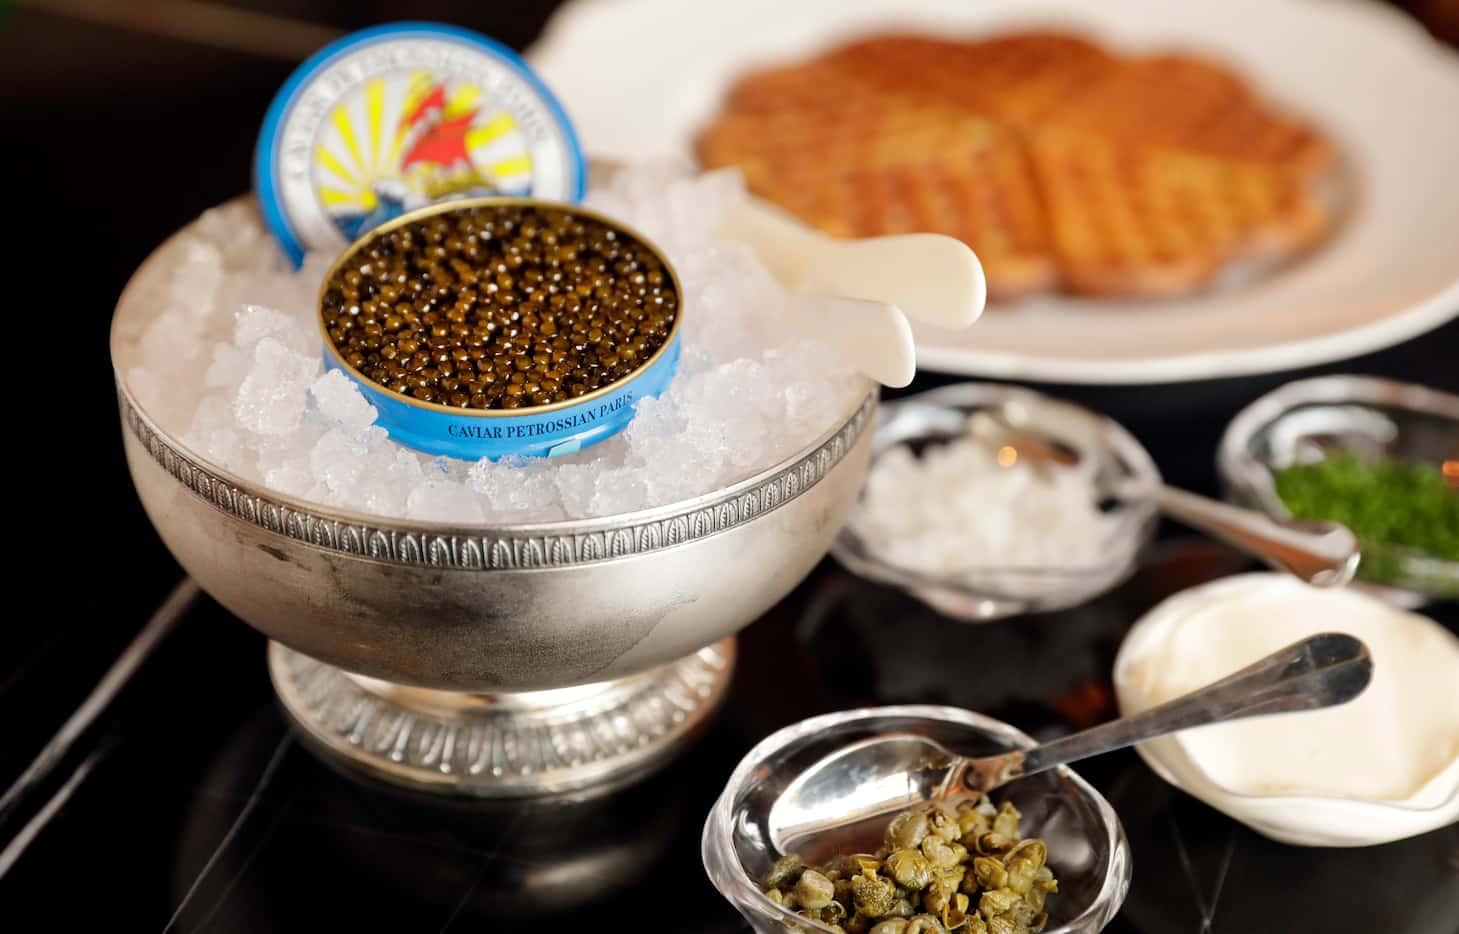 Petrossian Imperial Kaluga Caviar and waffle will be served at Bar Colette, a new bar in...